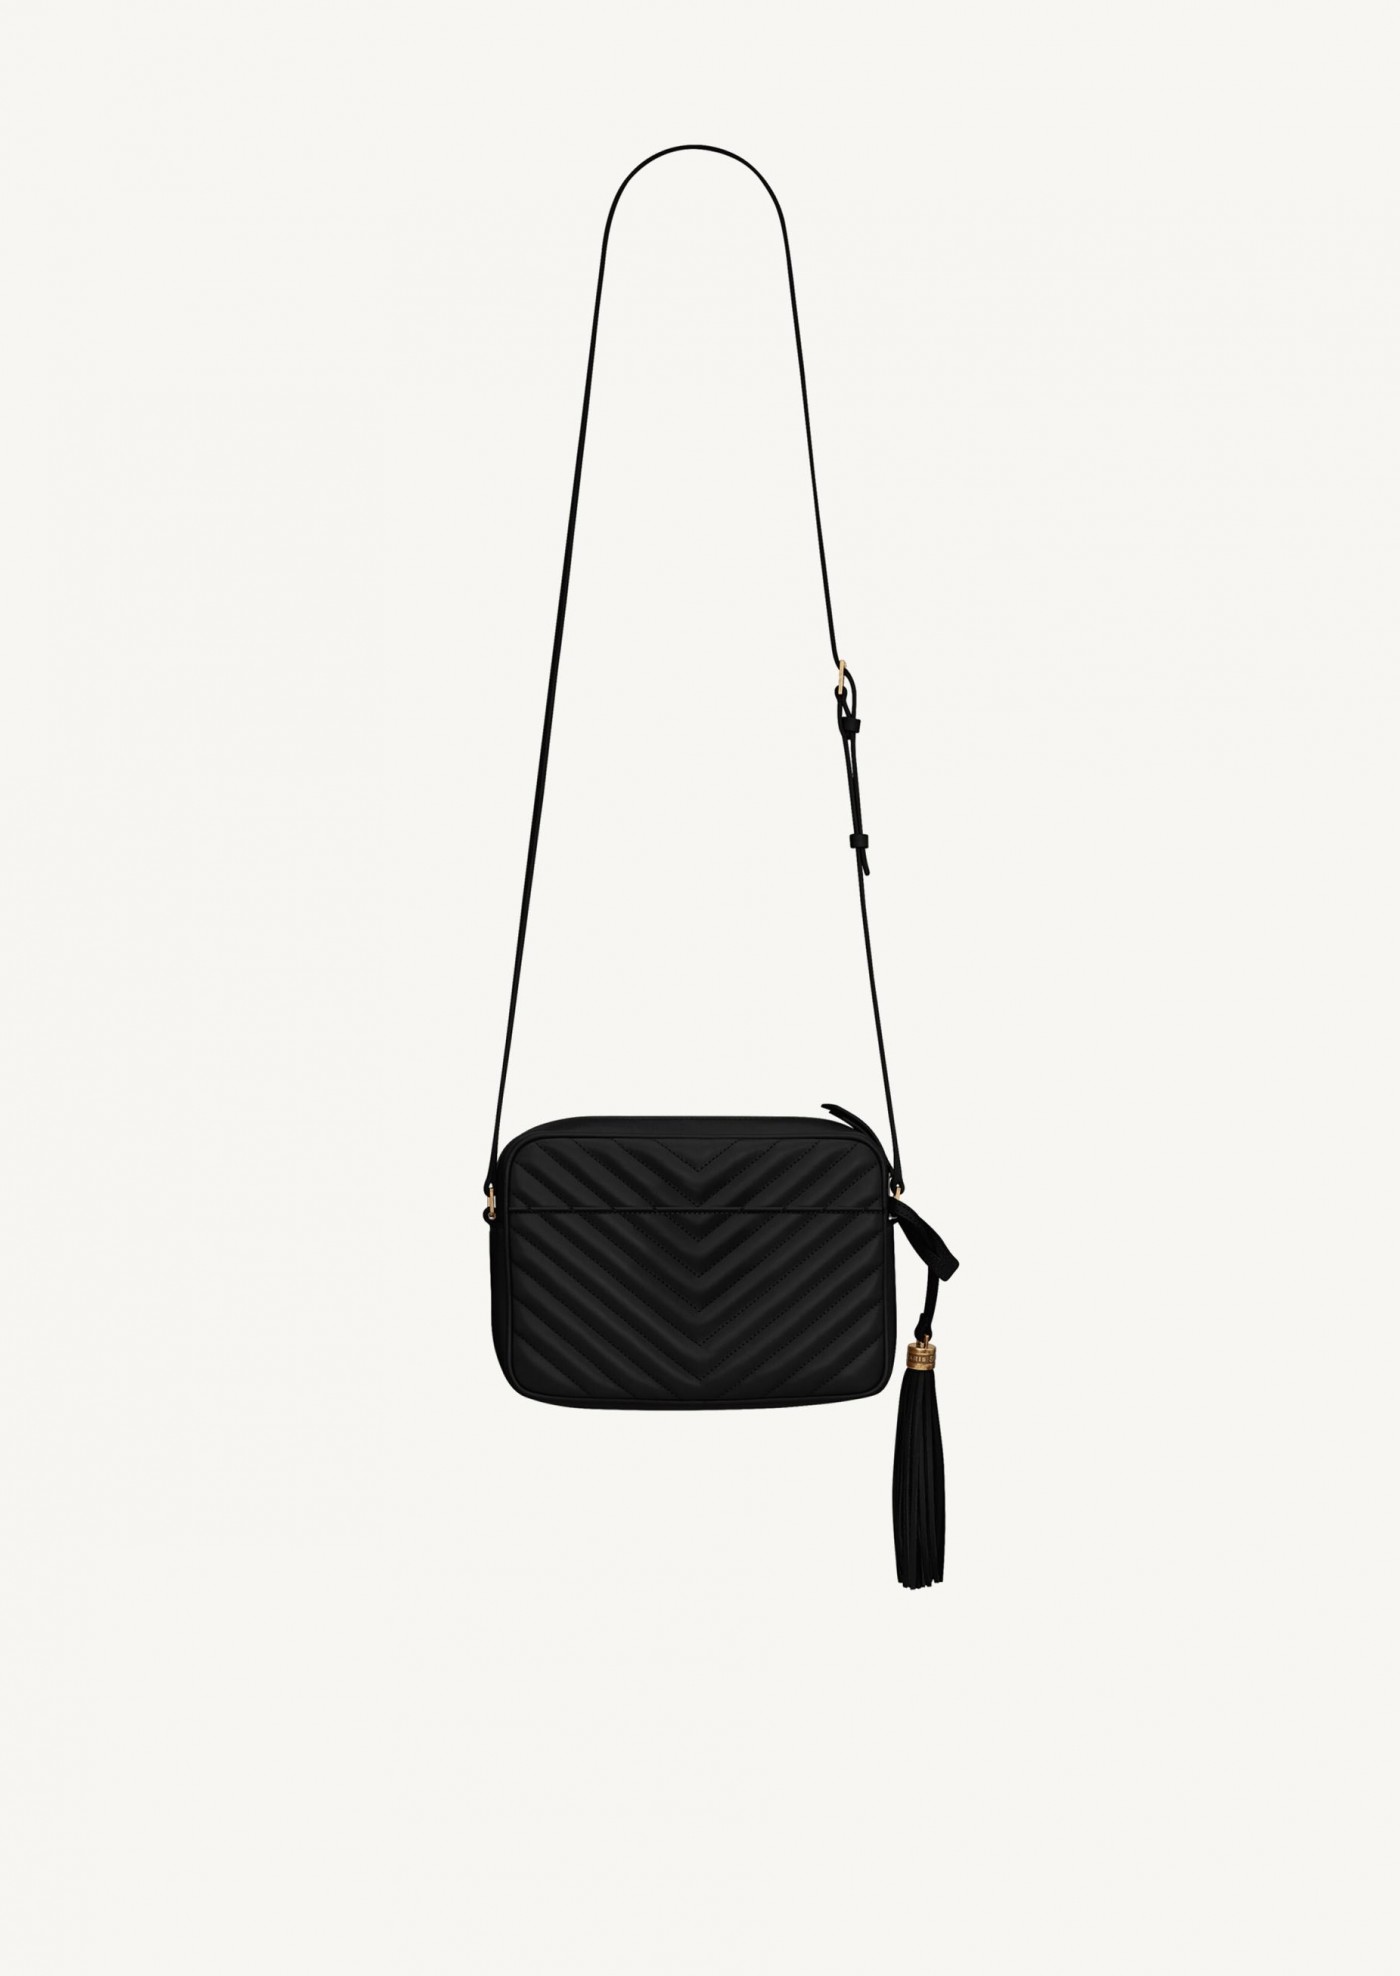 Lou camera bag in black quilted leather with gold finish